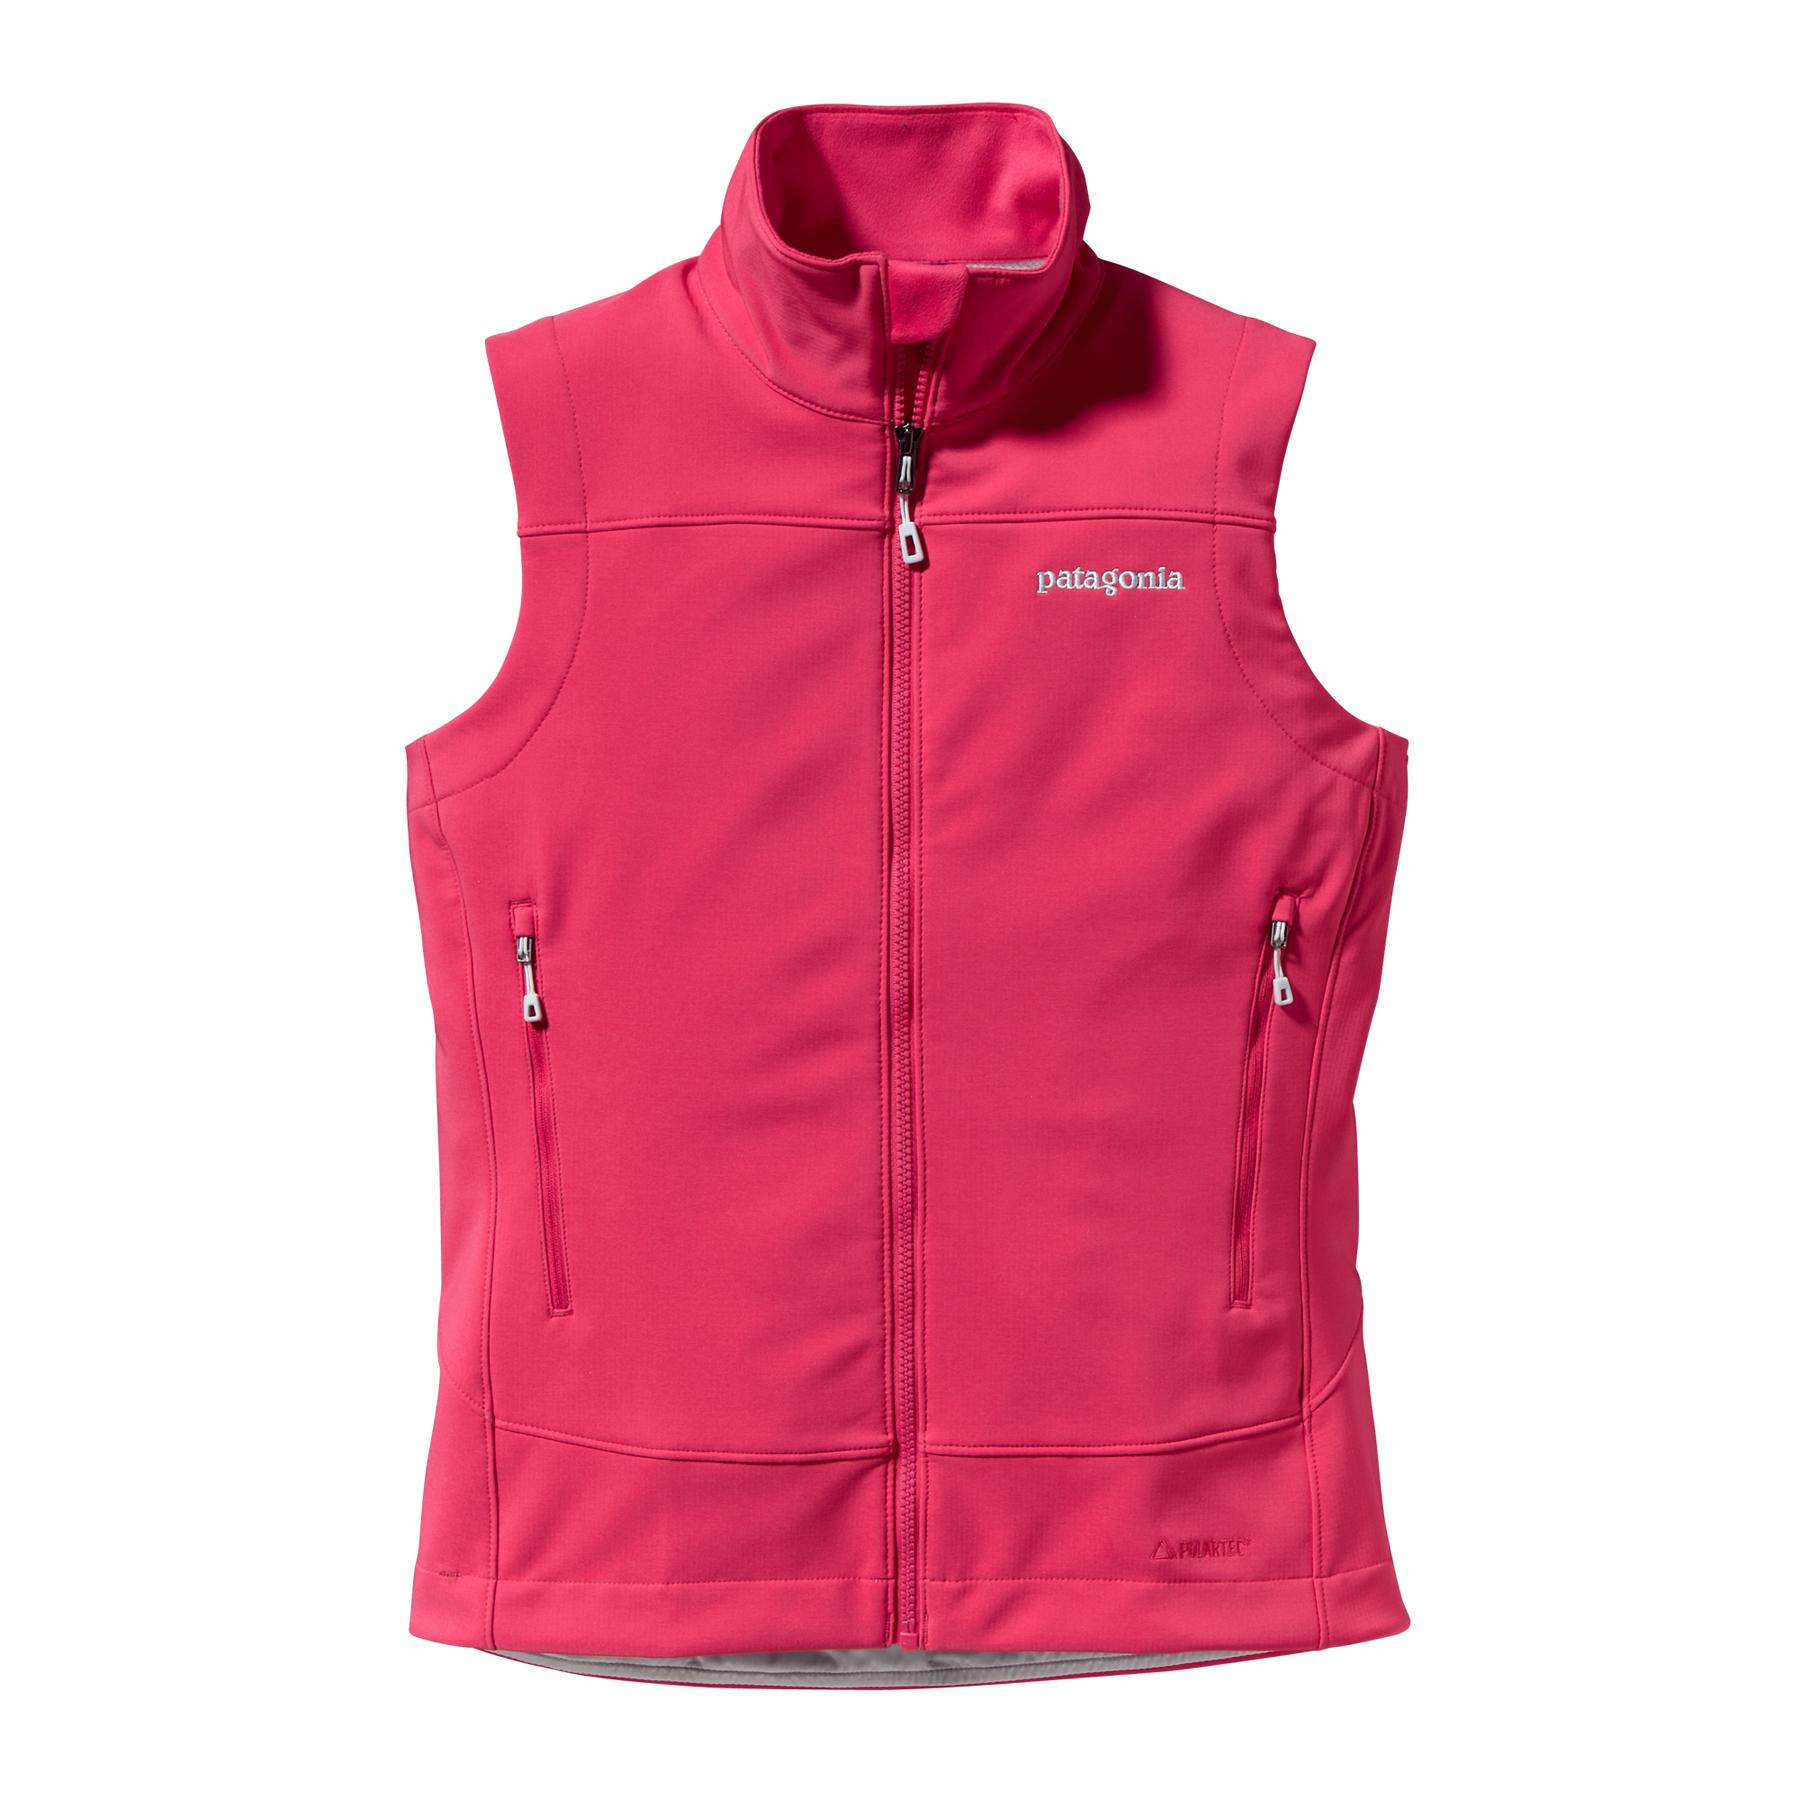 Foto Patagonia Adze Vest Lady Rossi Pink (Modell 2013)